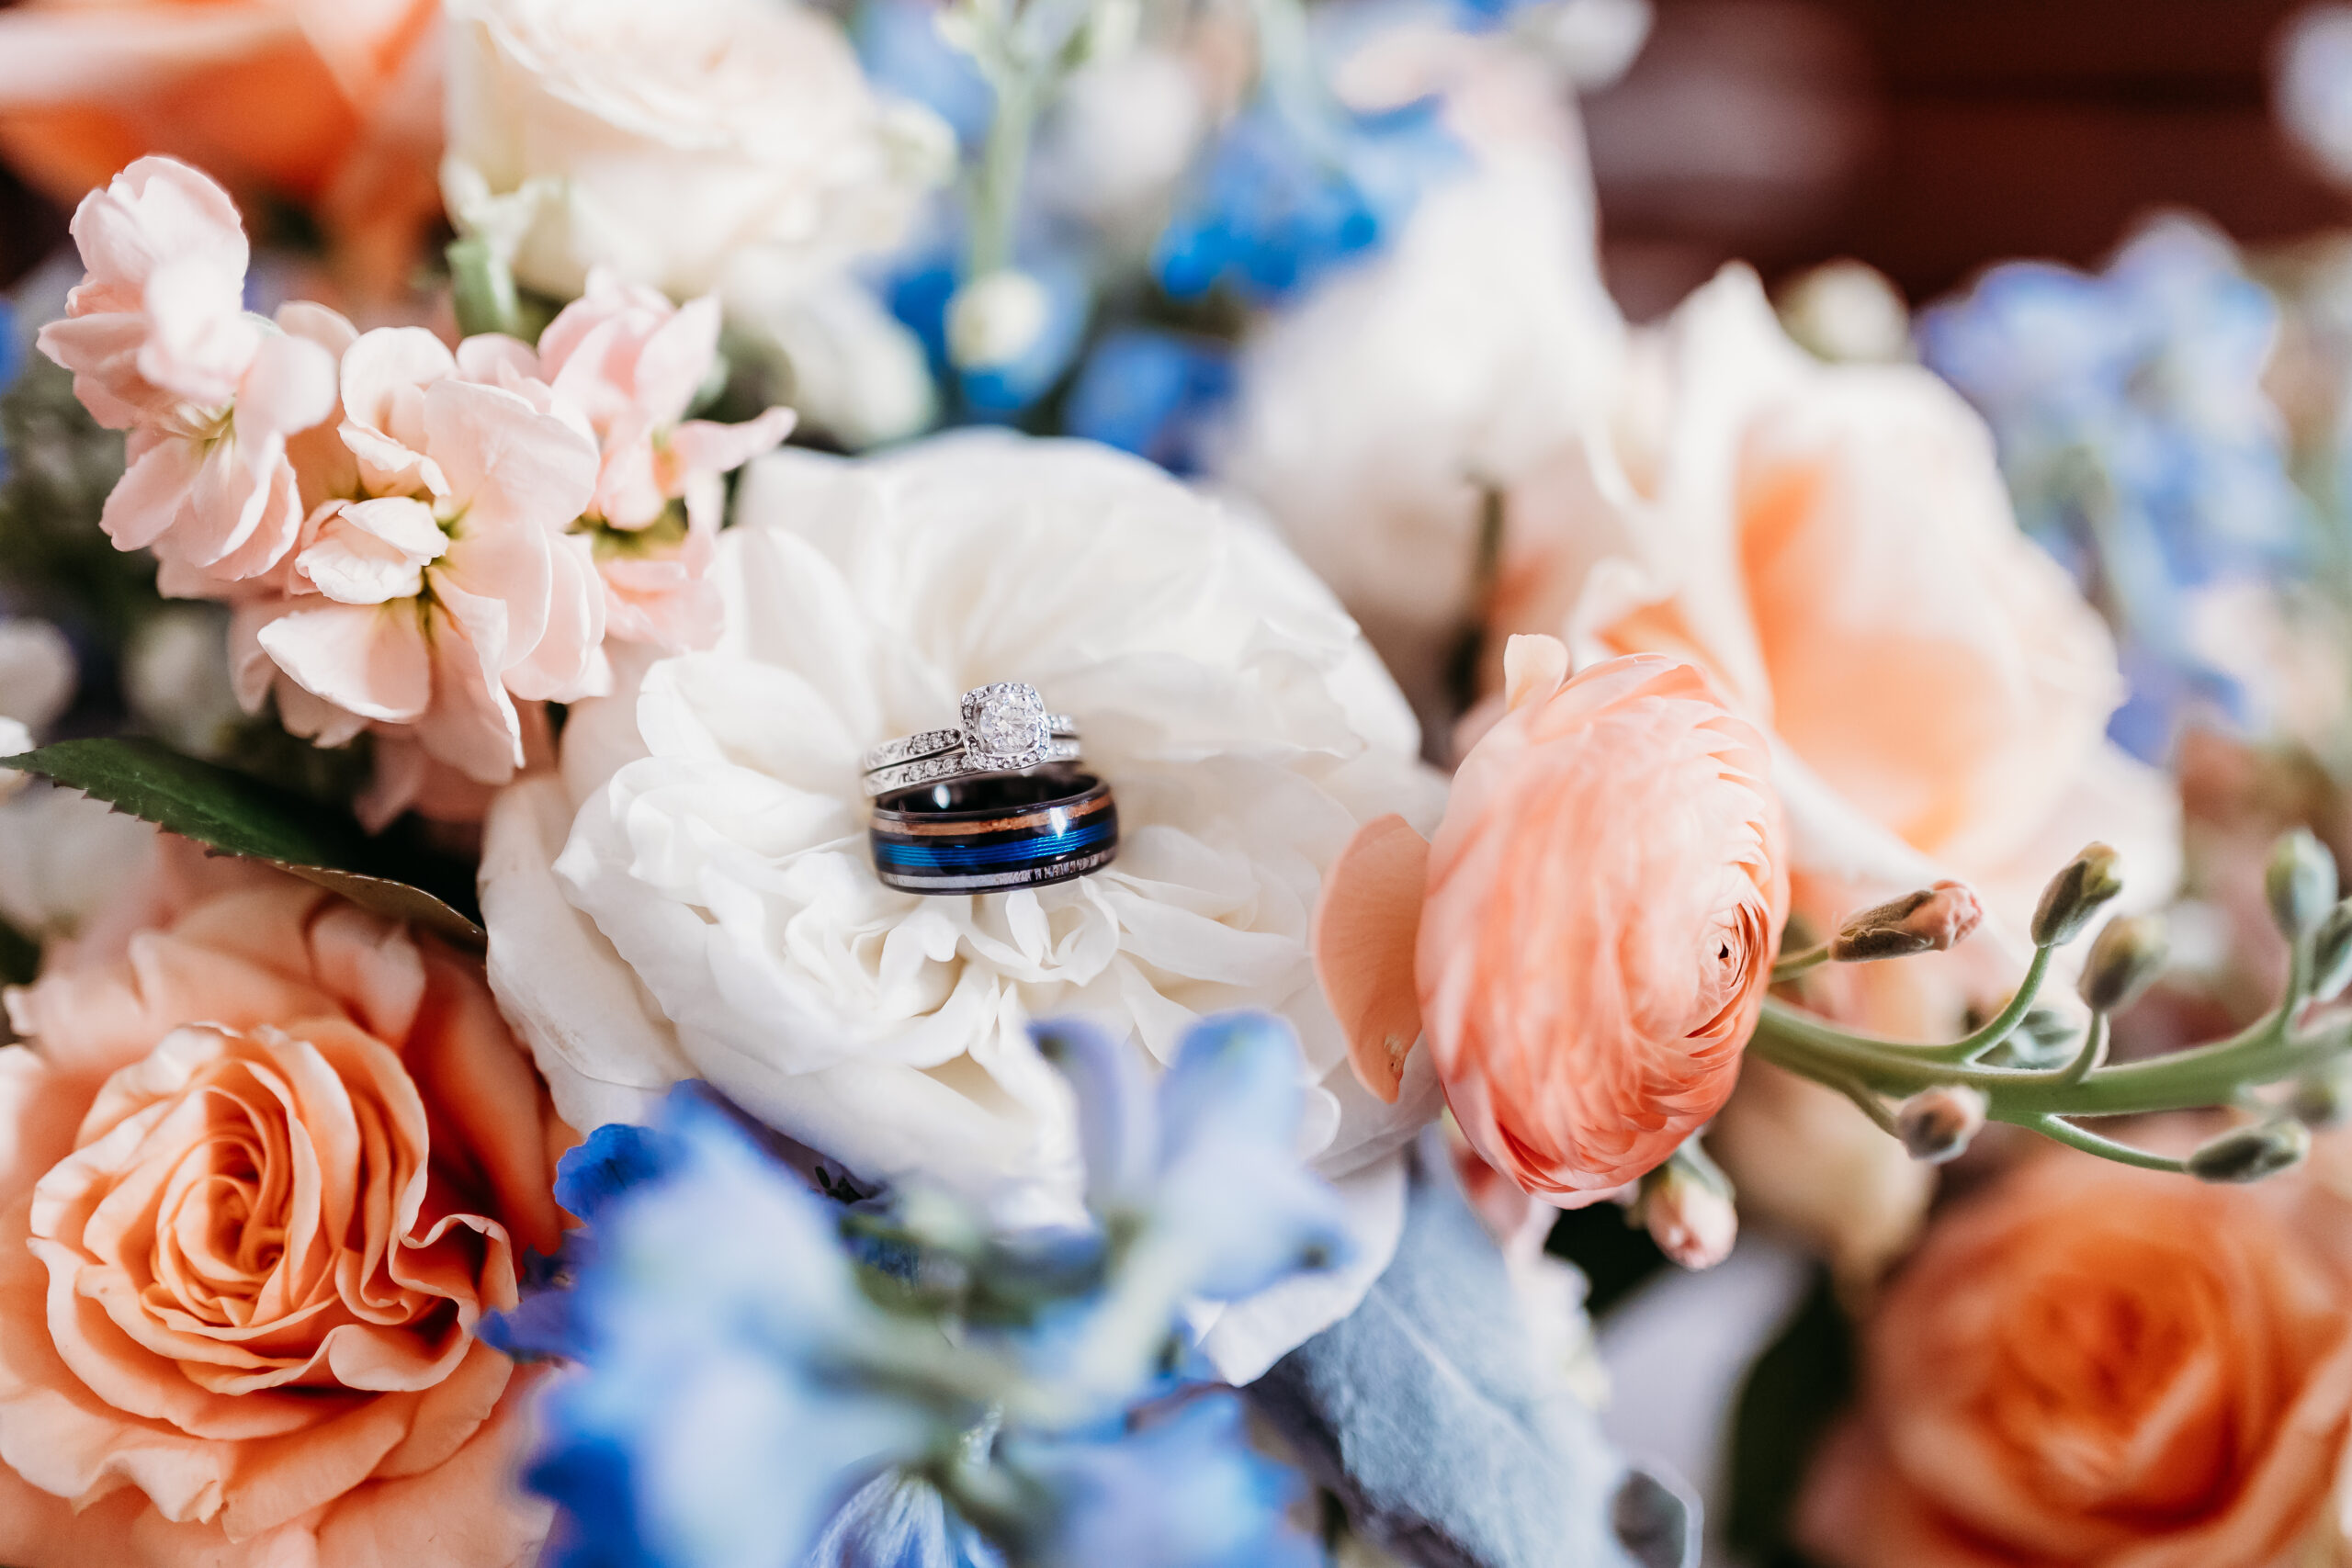 Bridge and groom rings placed on their wedding floral bouquet